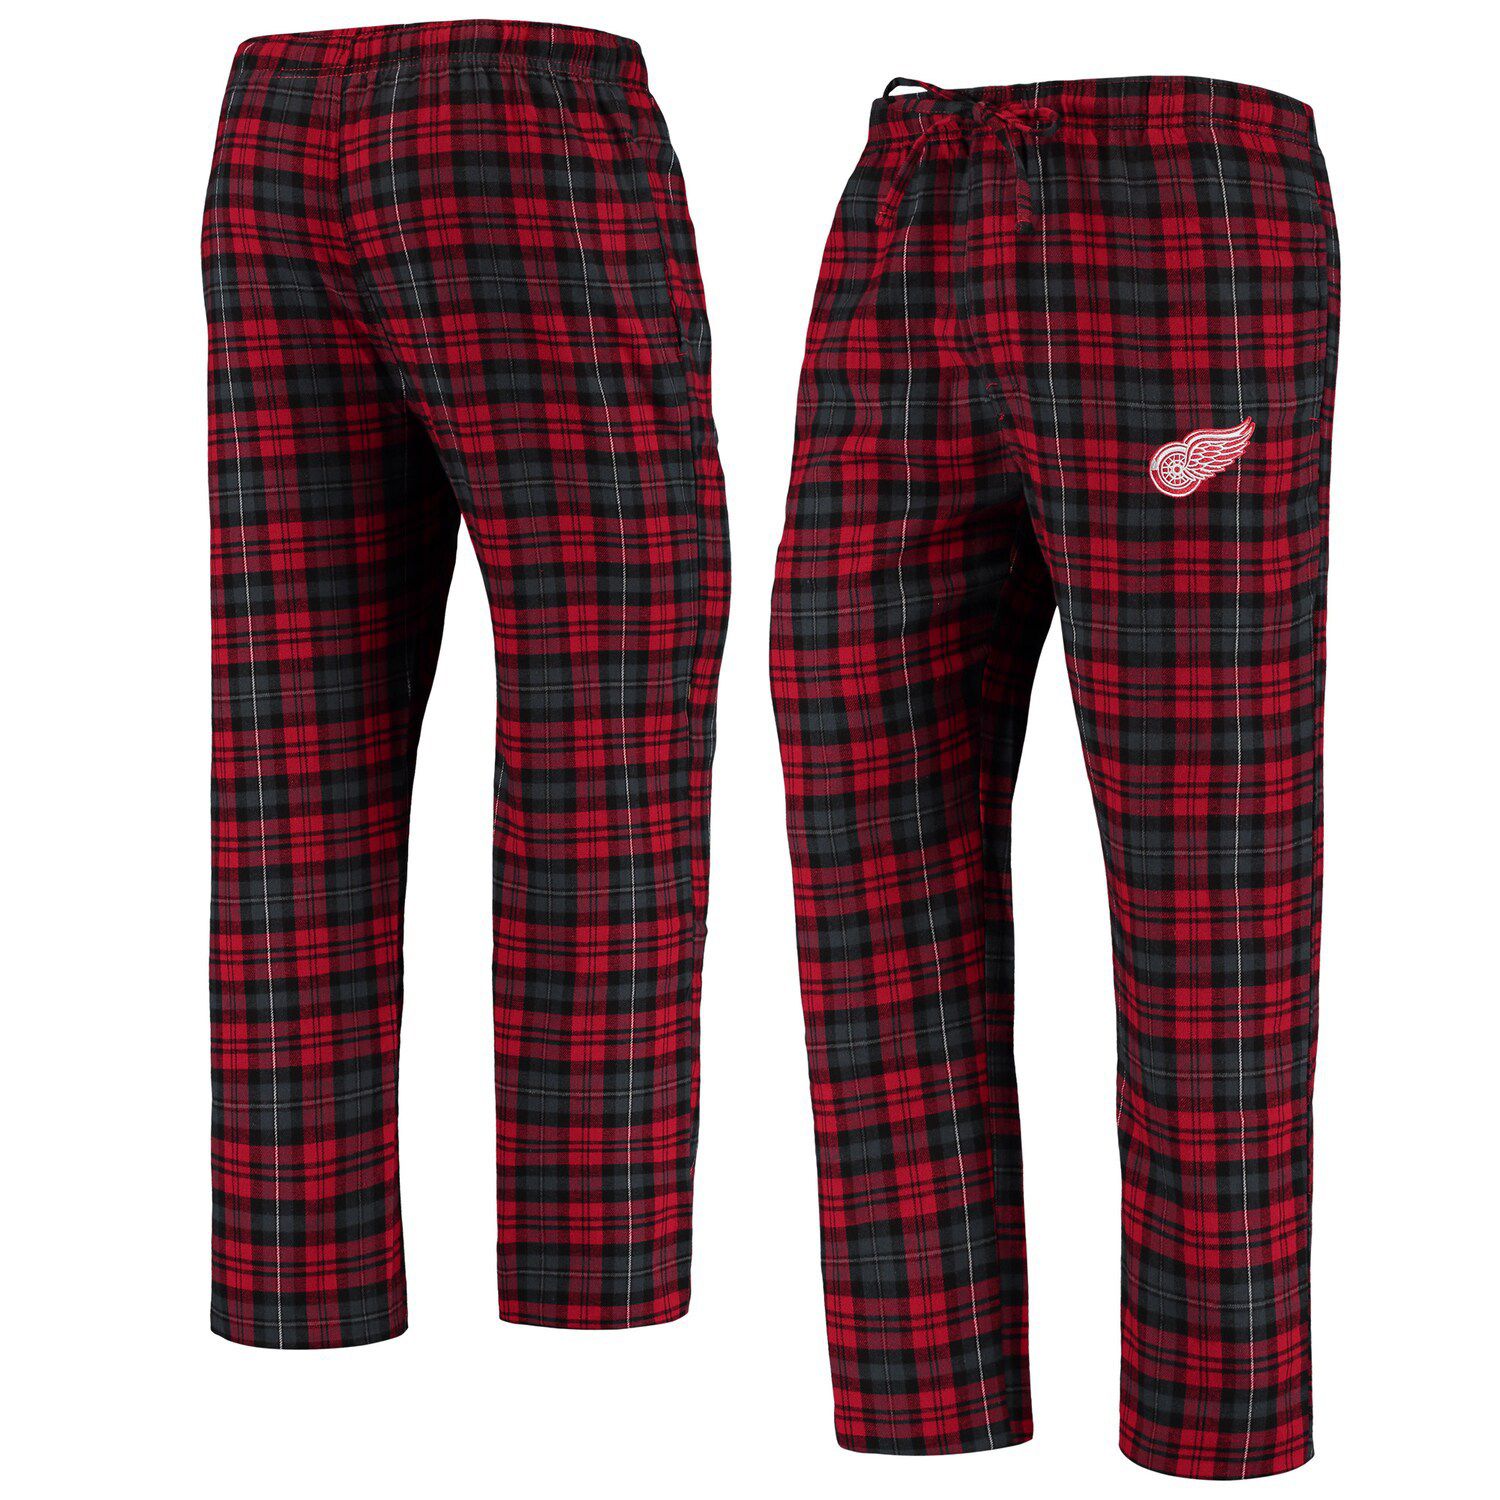 plaid red and black pants